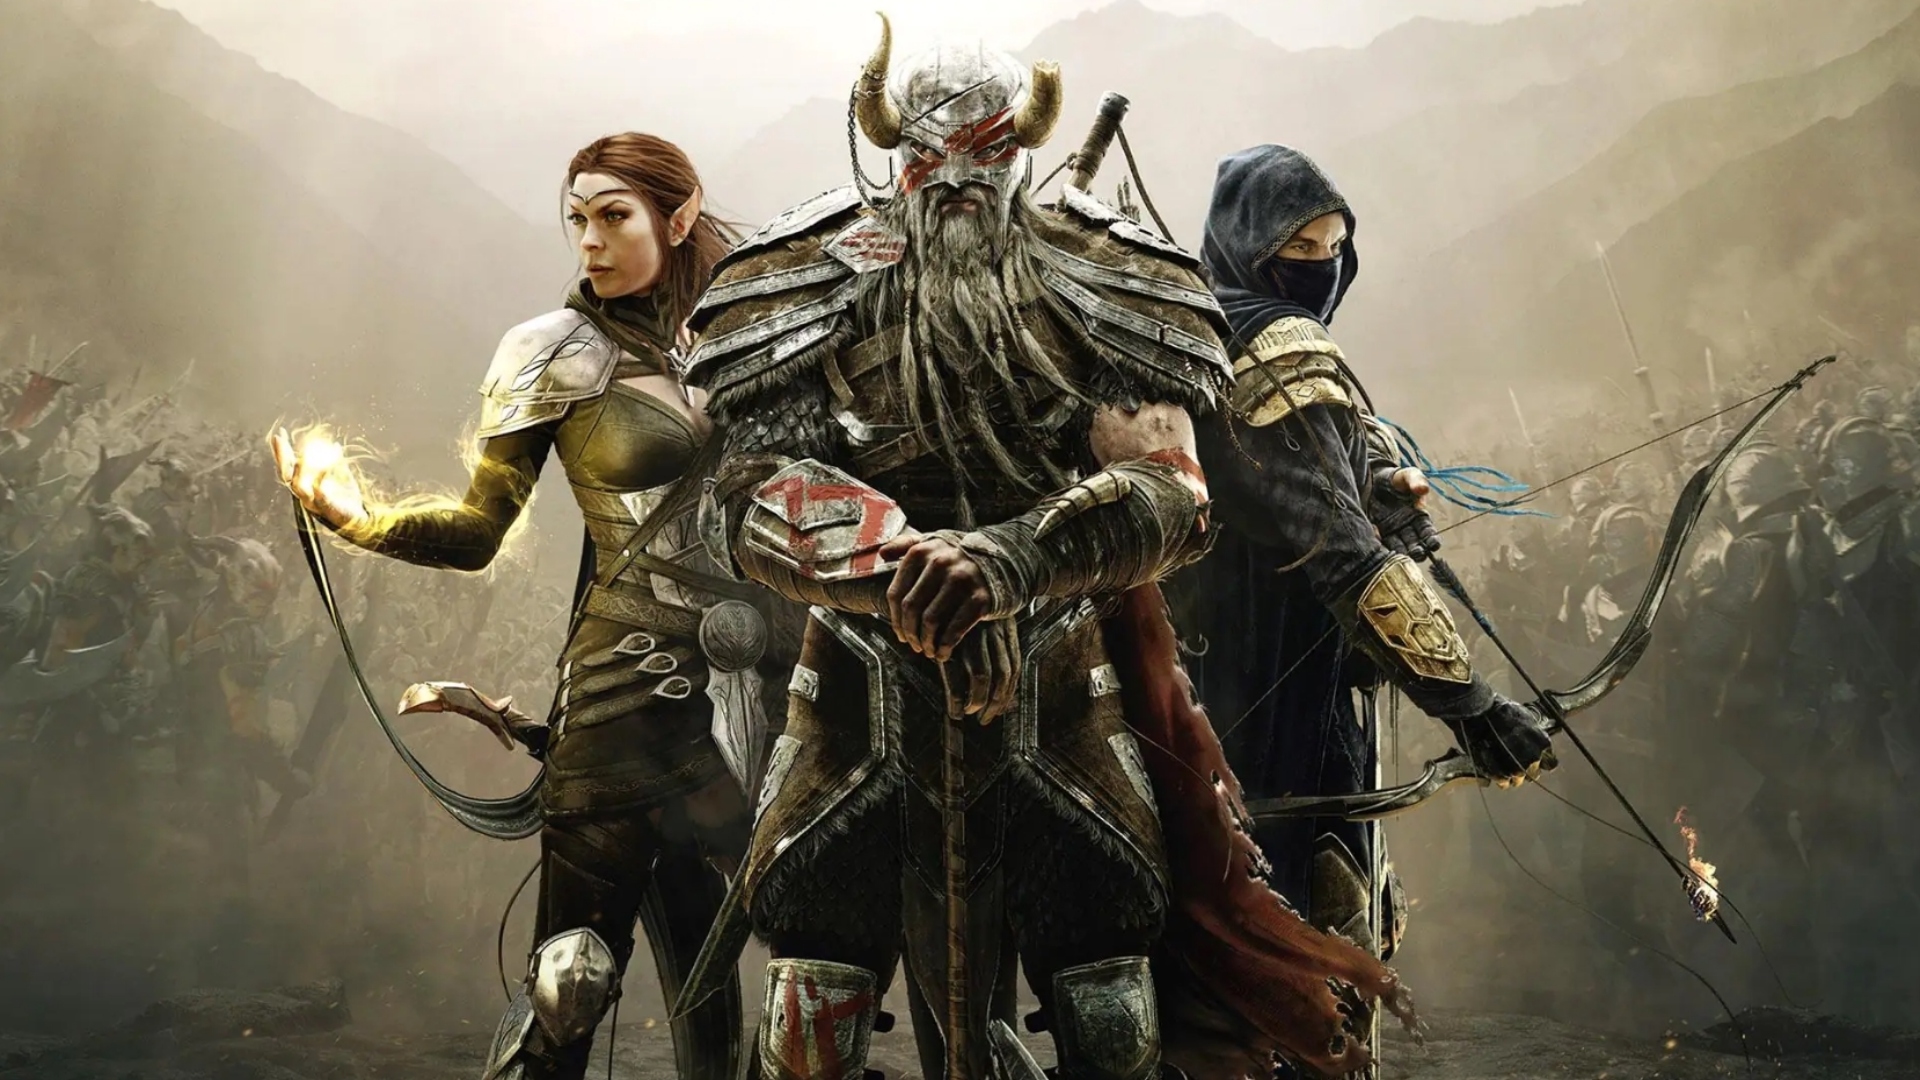 Characters from ESO, which takes place across many locations.